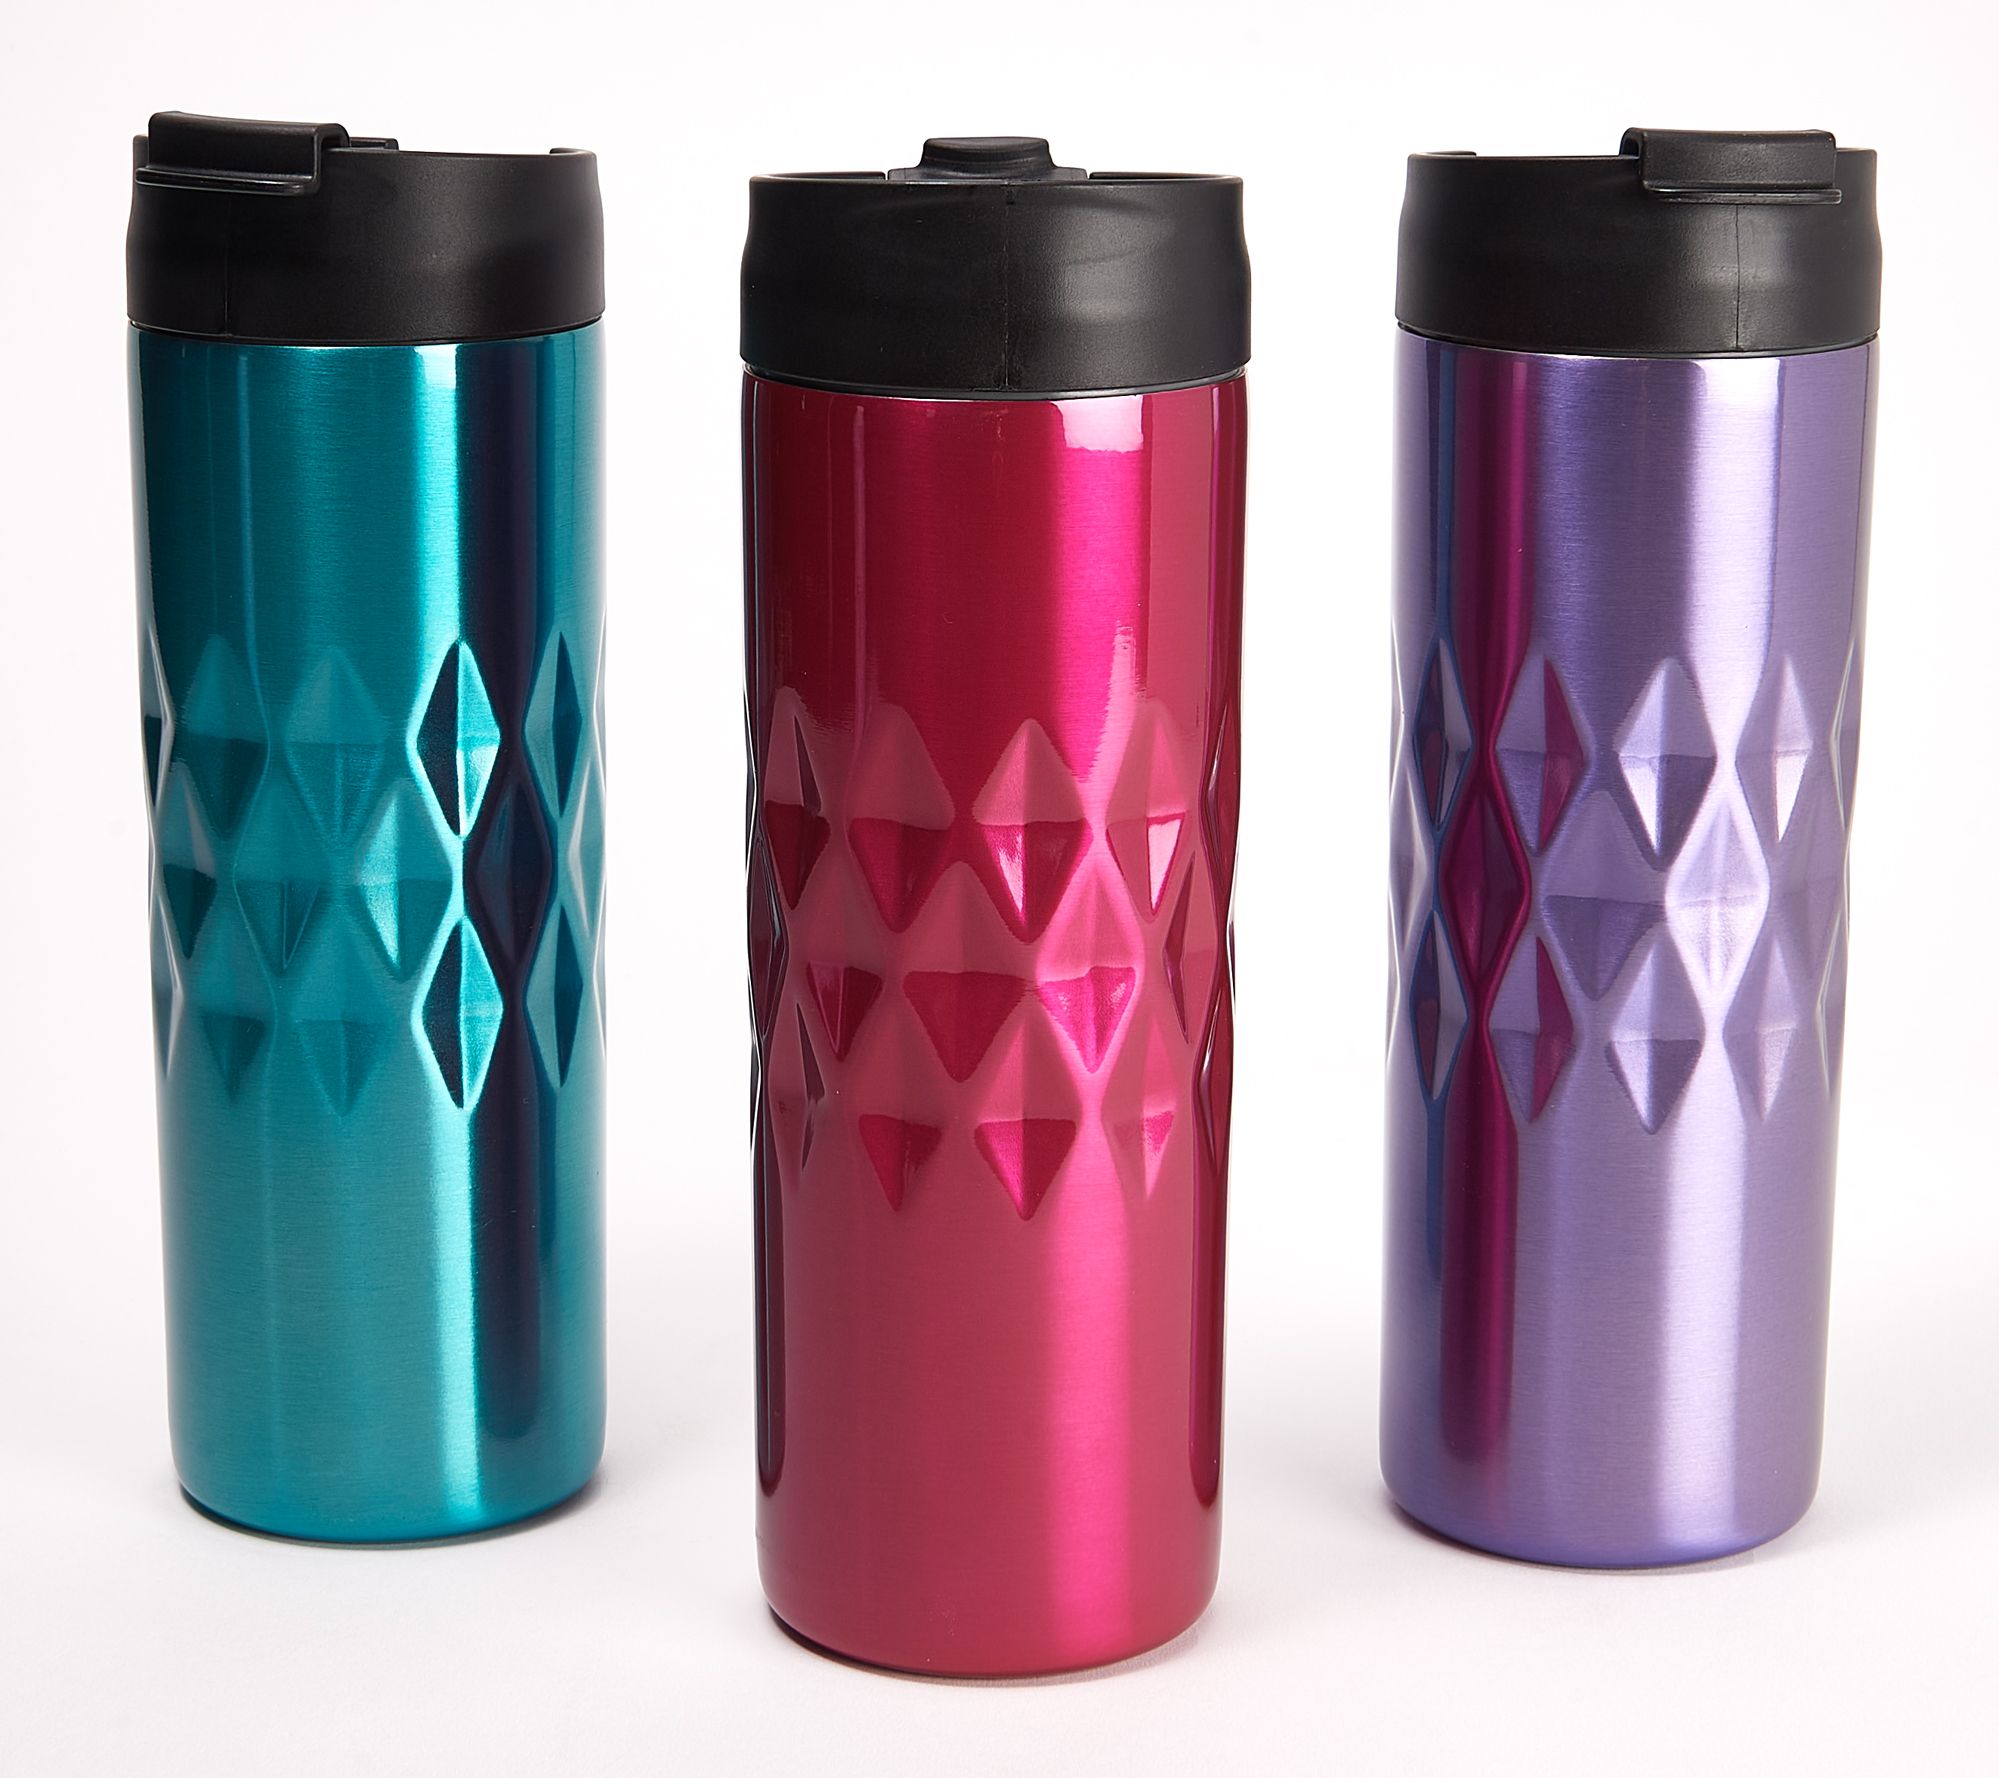 Primula, Dining, Primula Stainless Steel Insulated 2oz Tumblers